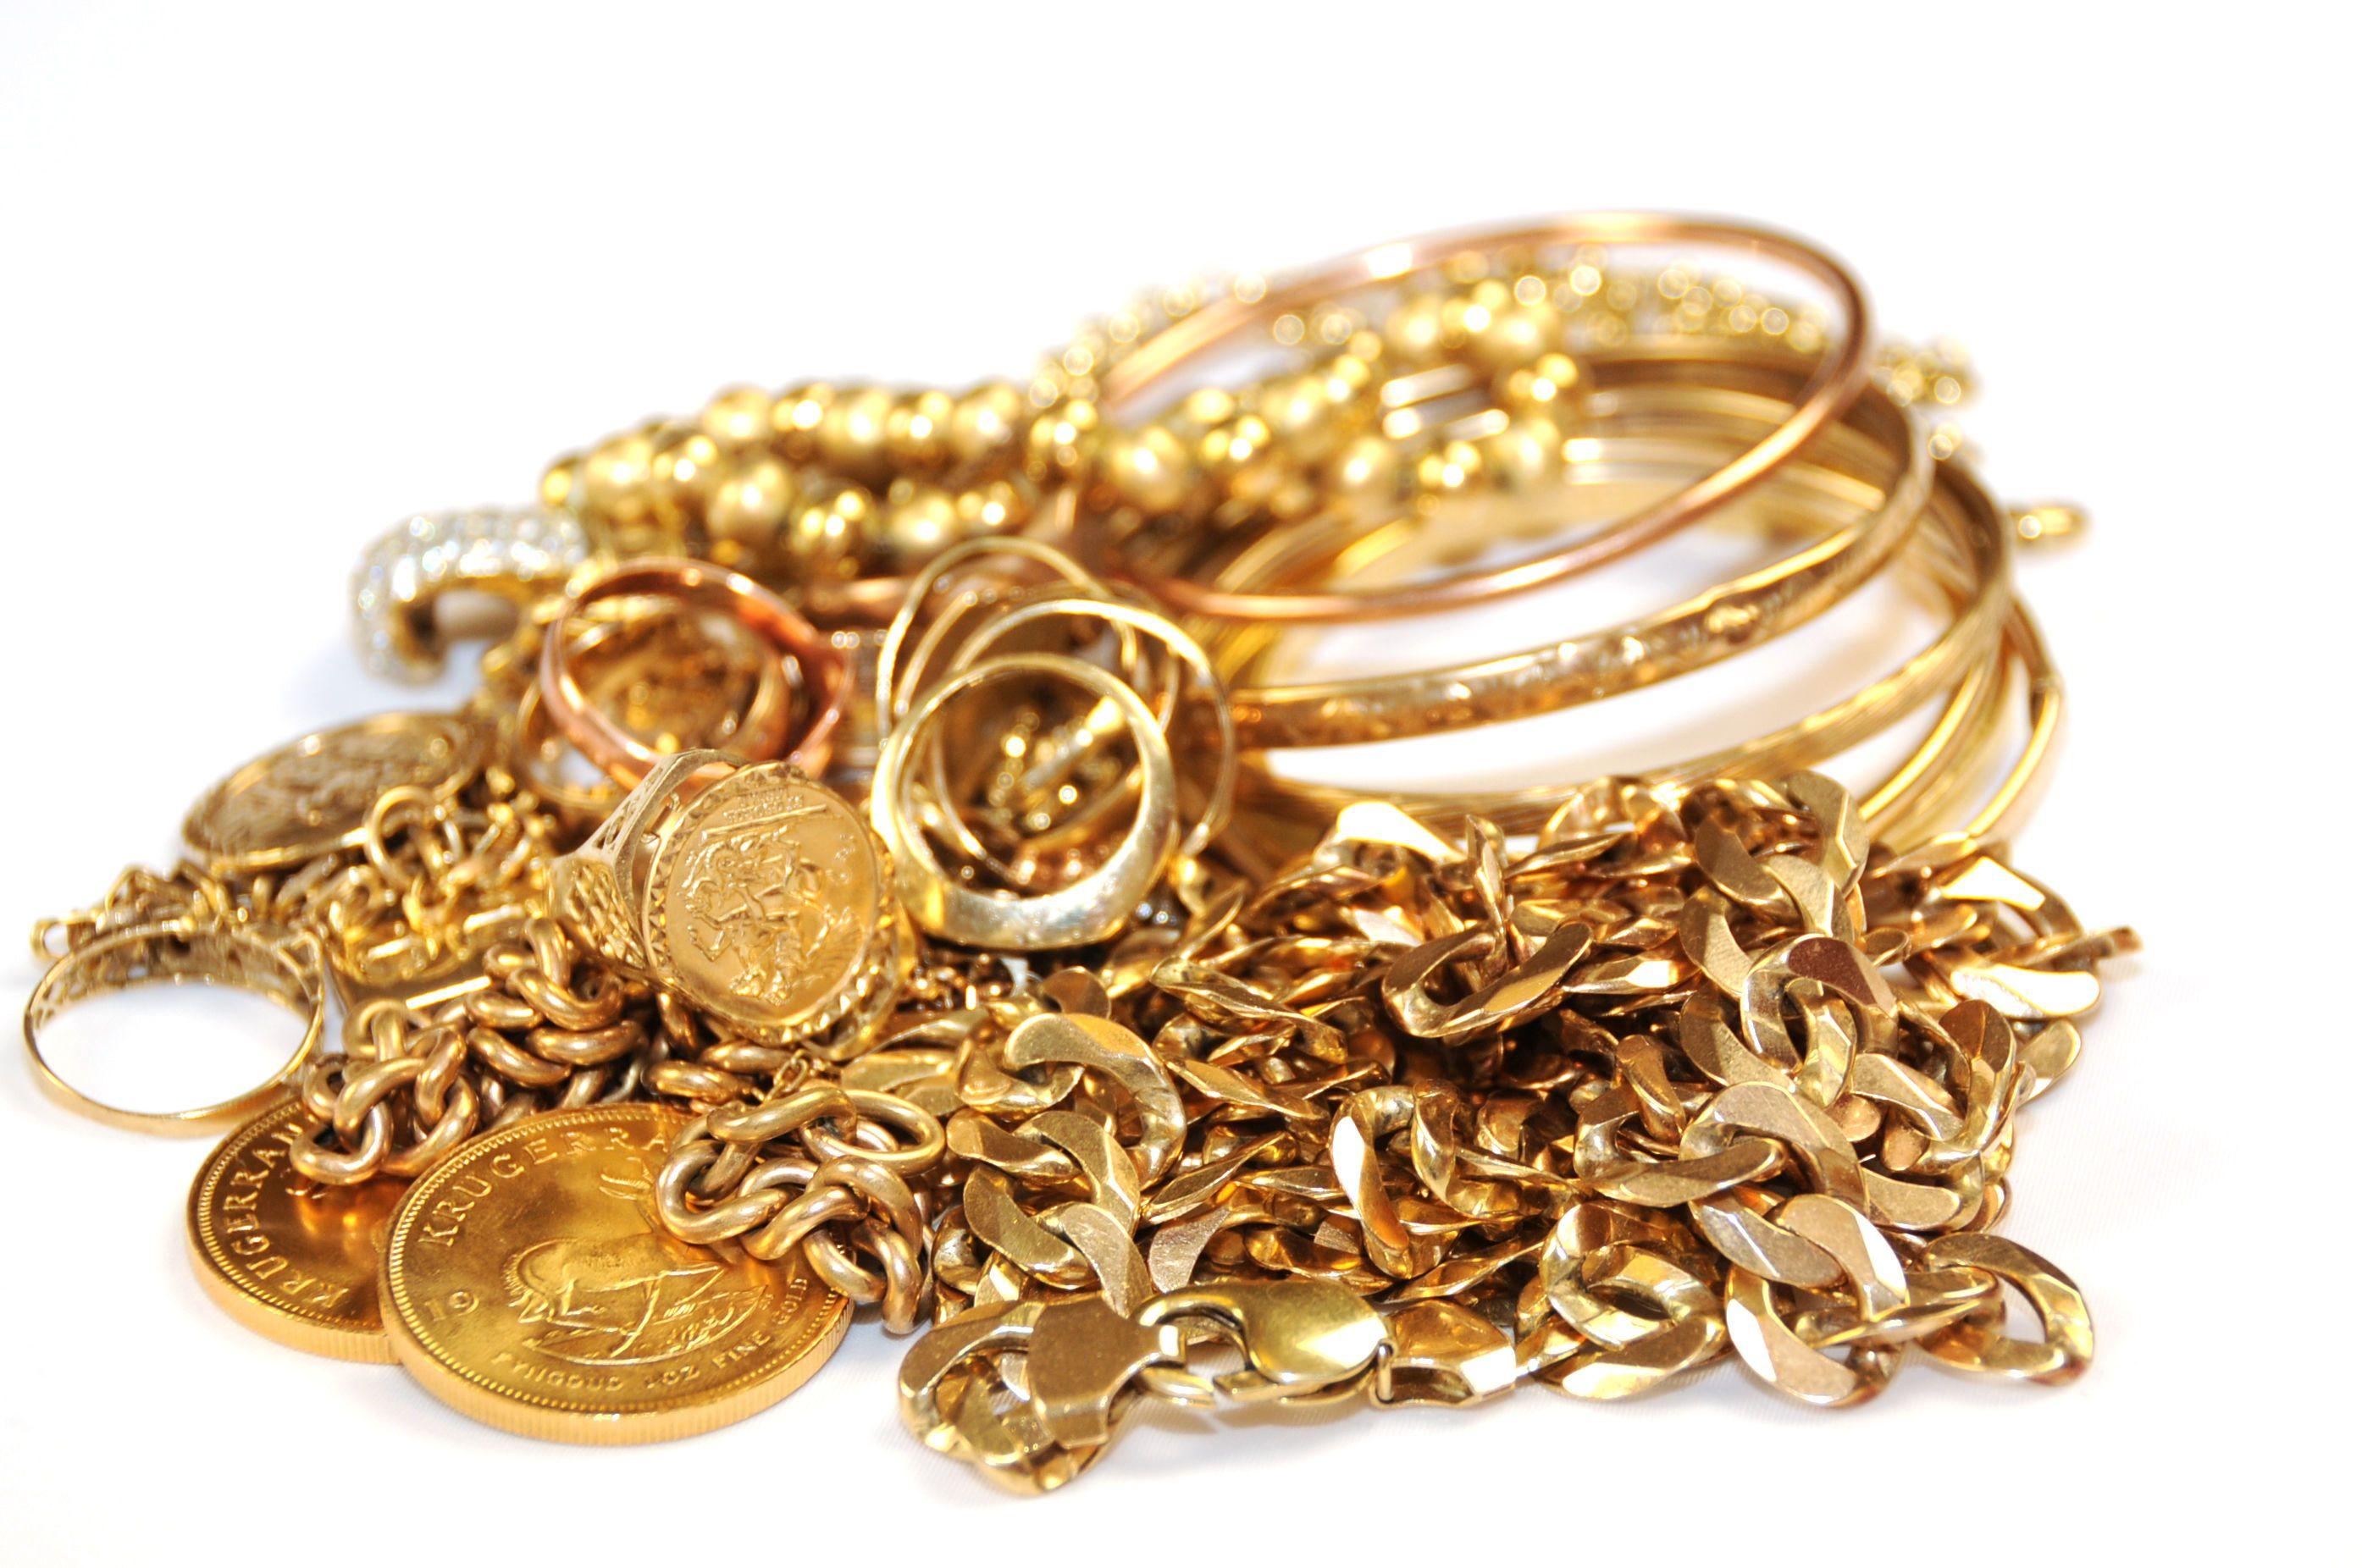 Gold Jewellery Wallpaper, Adorable HDQ Background of Gold